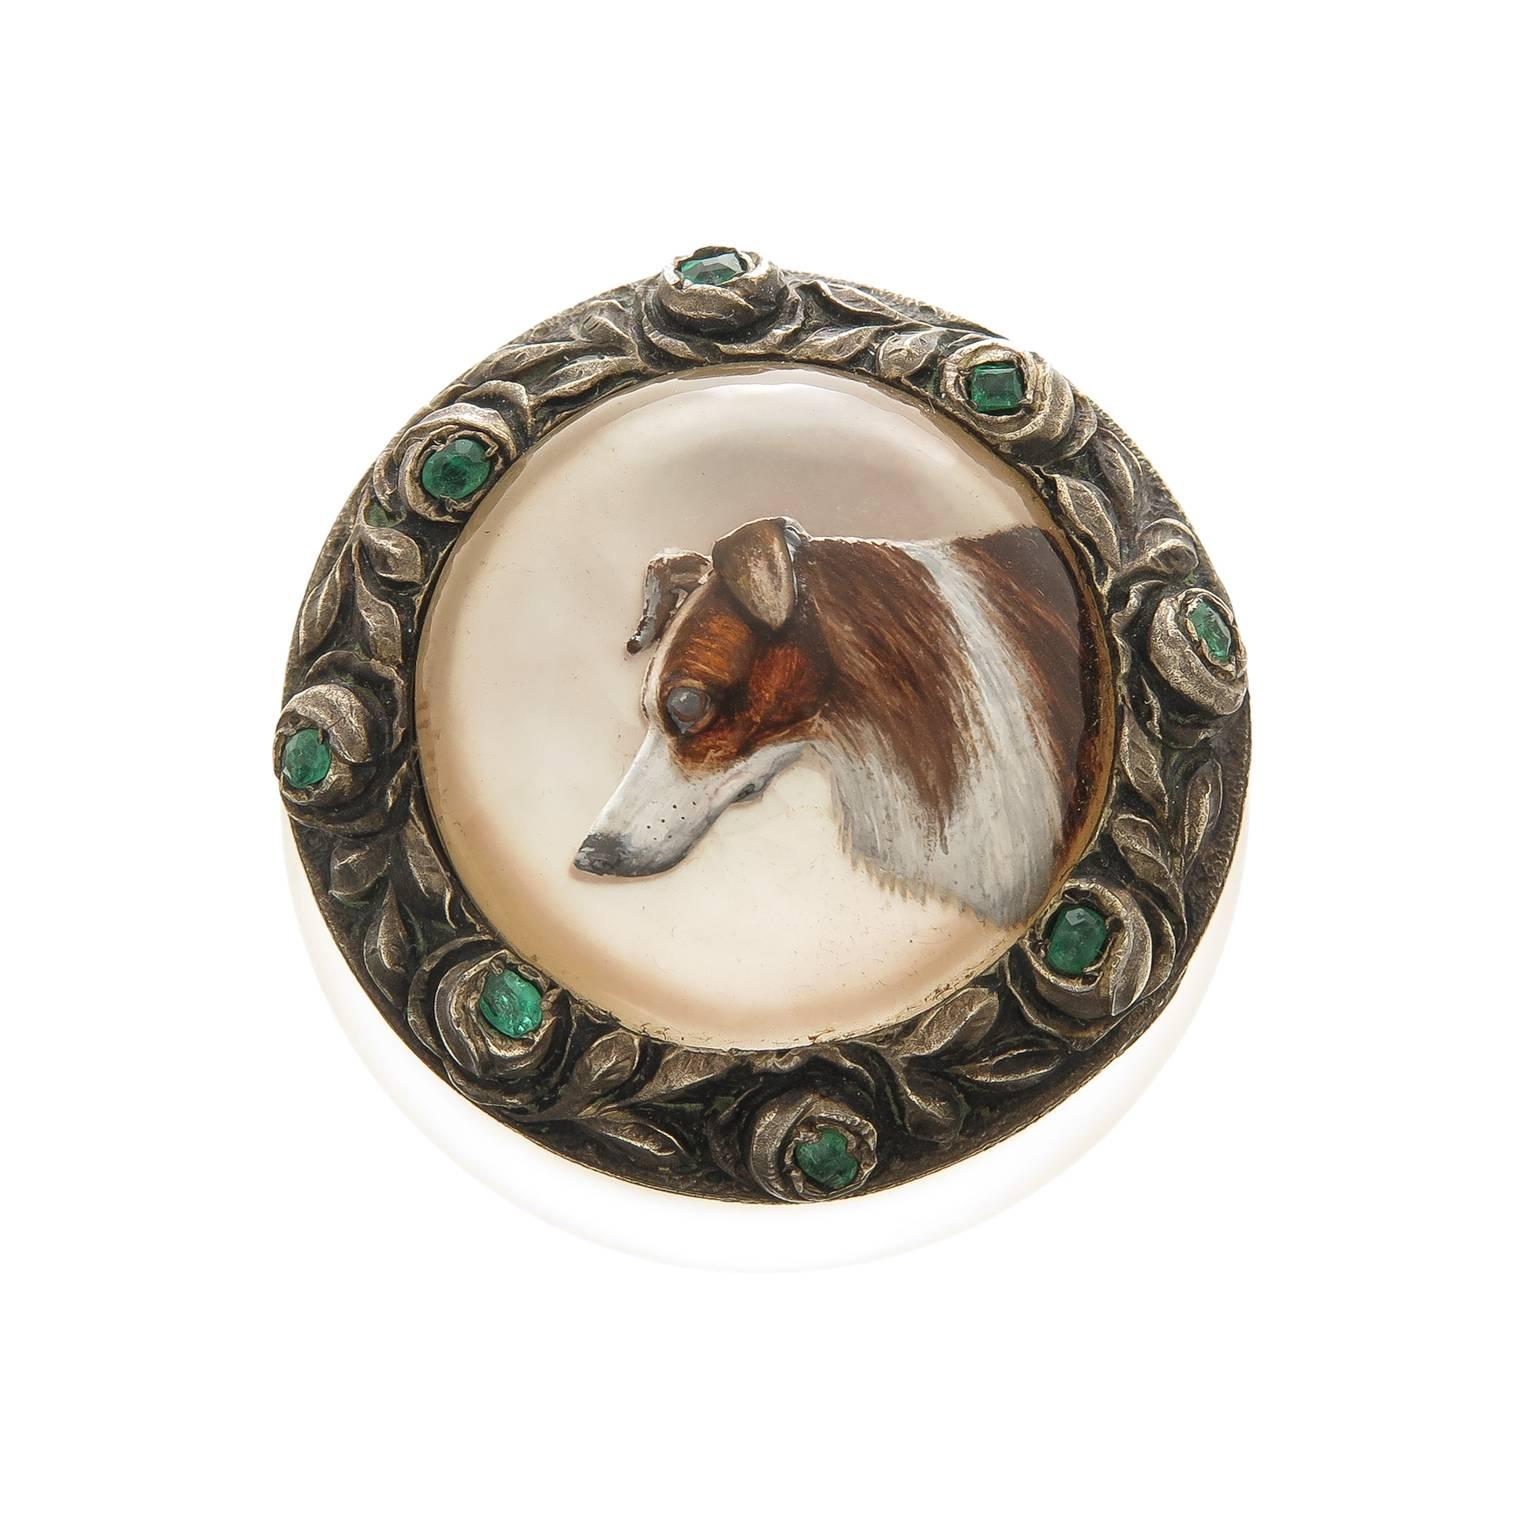 Circa 1915 Frosted crystal pill or snuff box, measuring 1 1/4 inch in diameter and 1 inch in height. Having a silver hinged top with a mother of Pearl backed reverse crystal of a Collie dog that measures 3/4 inch and is of very fine quality and